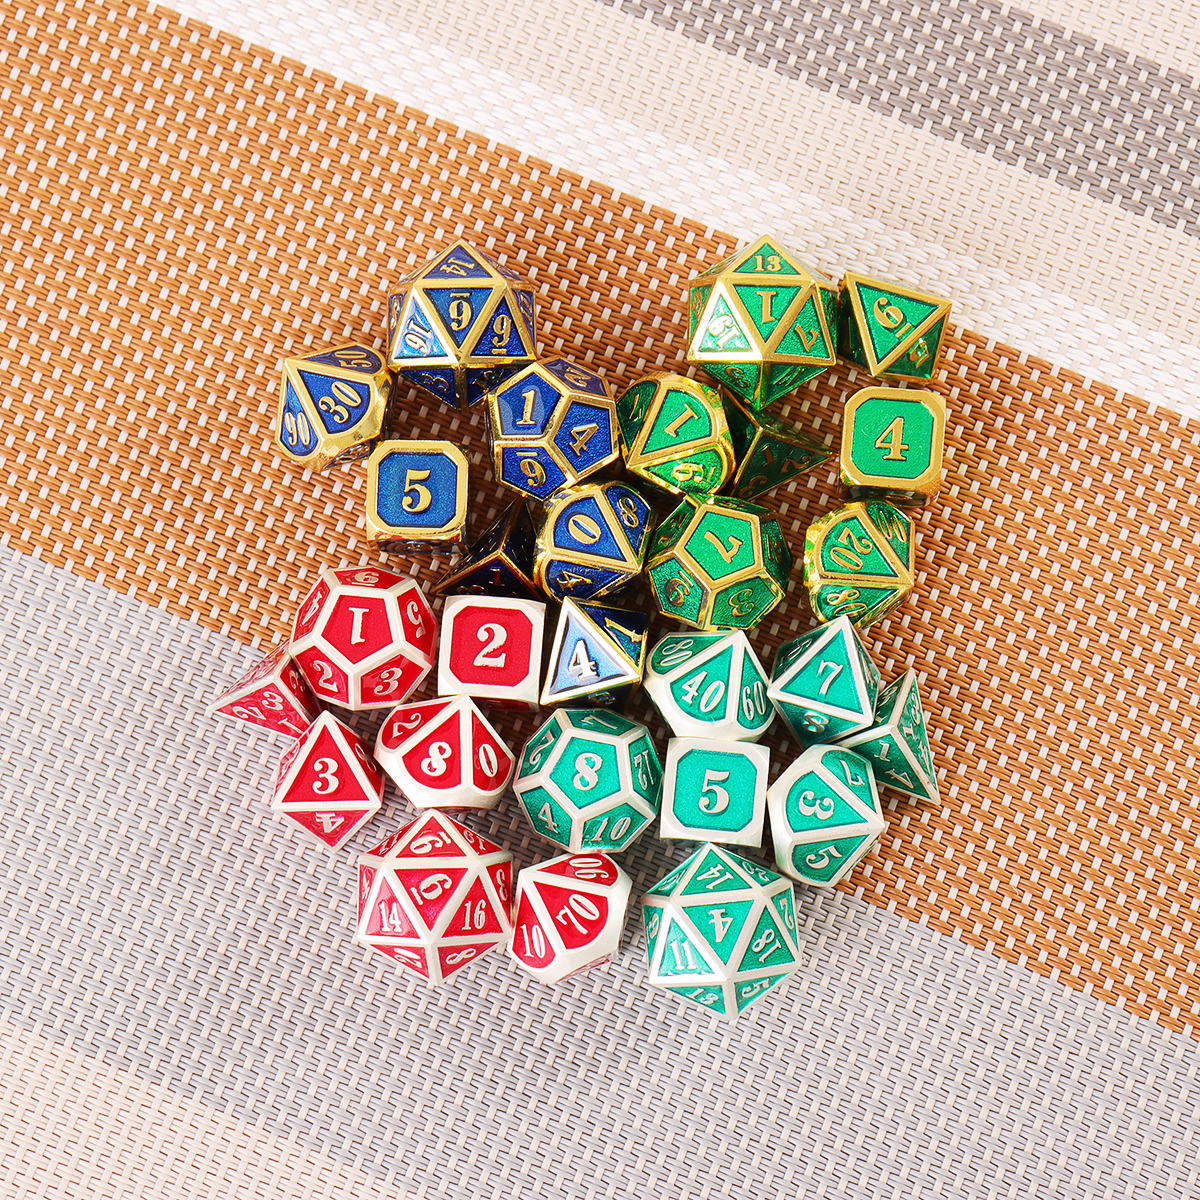 7Pcs-Heavy-Duty-Metal-Polyhedral-Dices-Set-Multisided-Dice-Antique-RPG-Role-Playing-Game-Dices-1371263-2